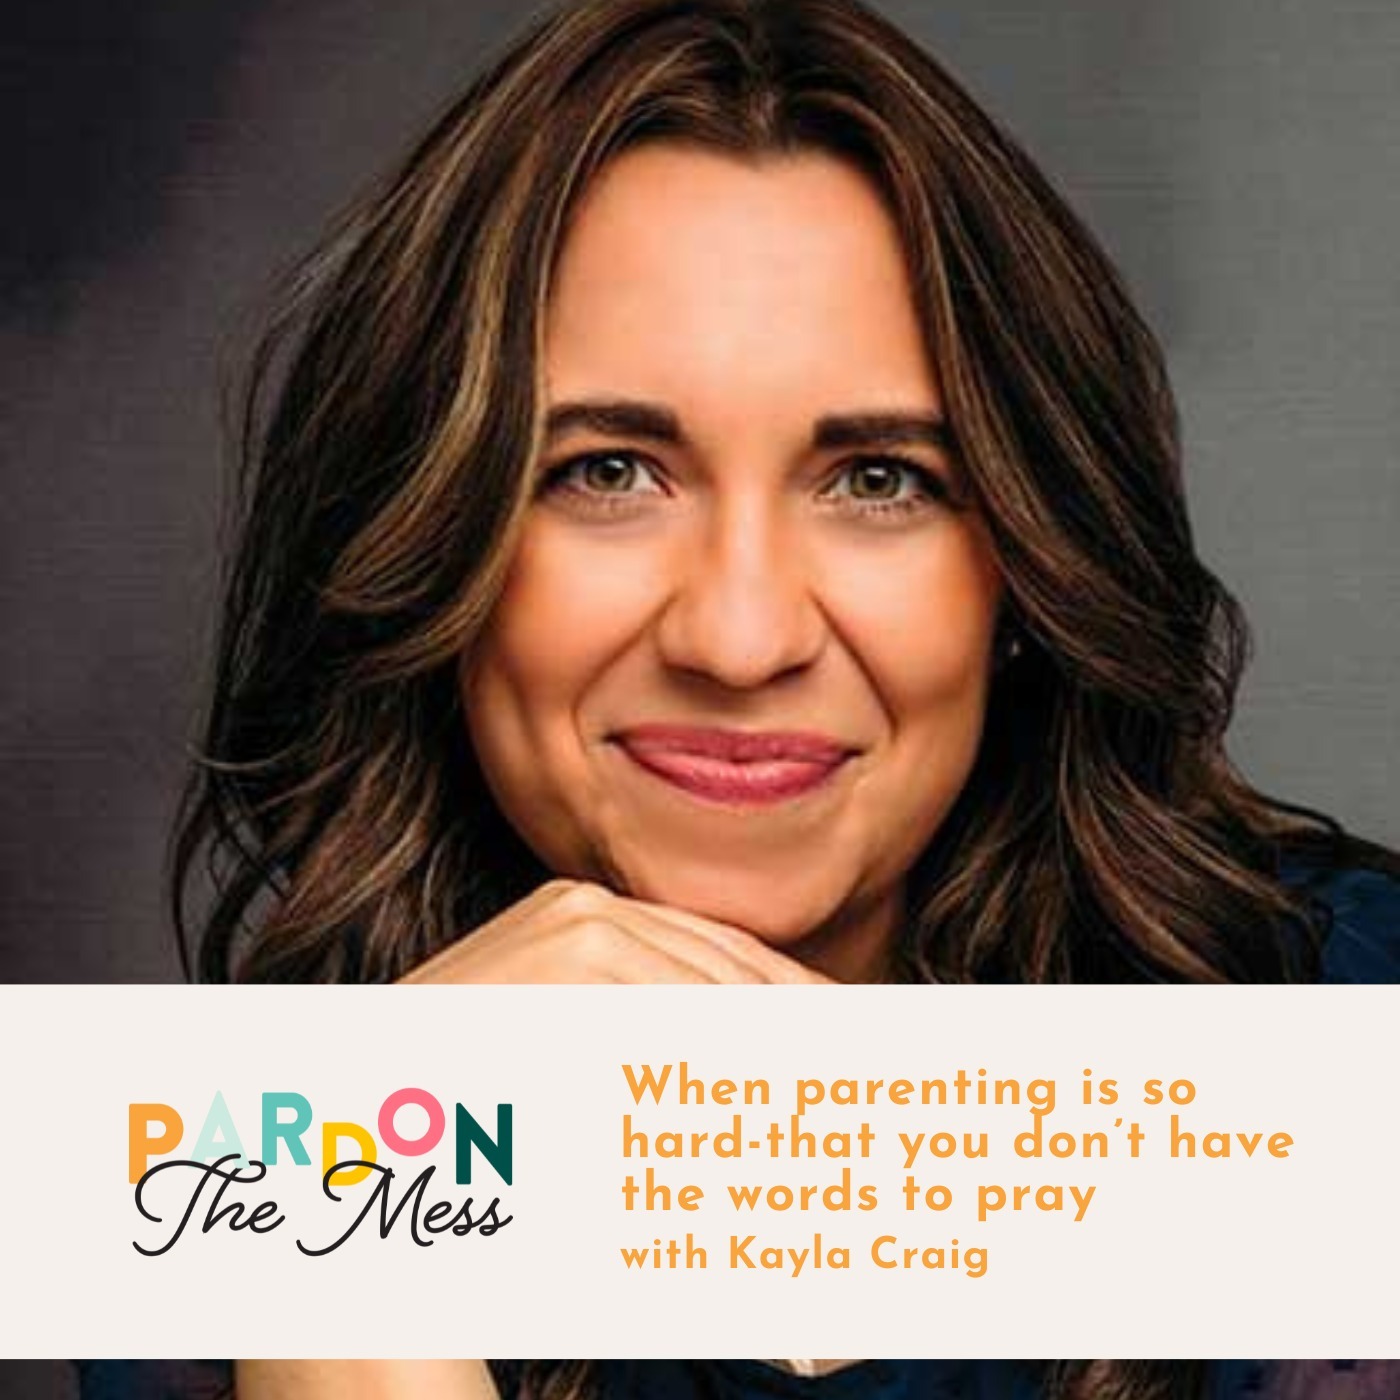 When parenting is so hard - that you don’t have the words to pray with Kayla Craig